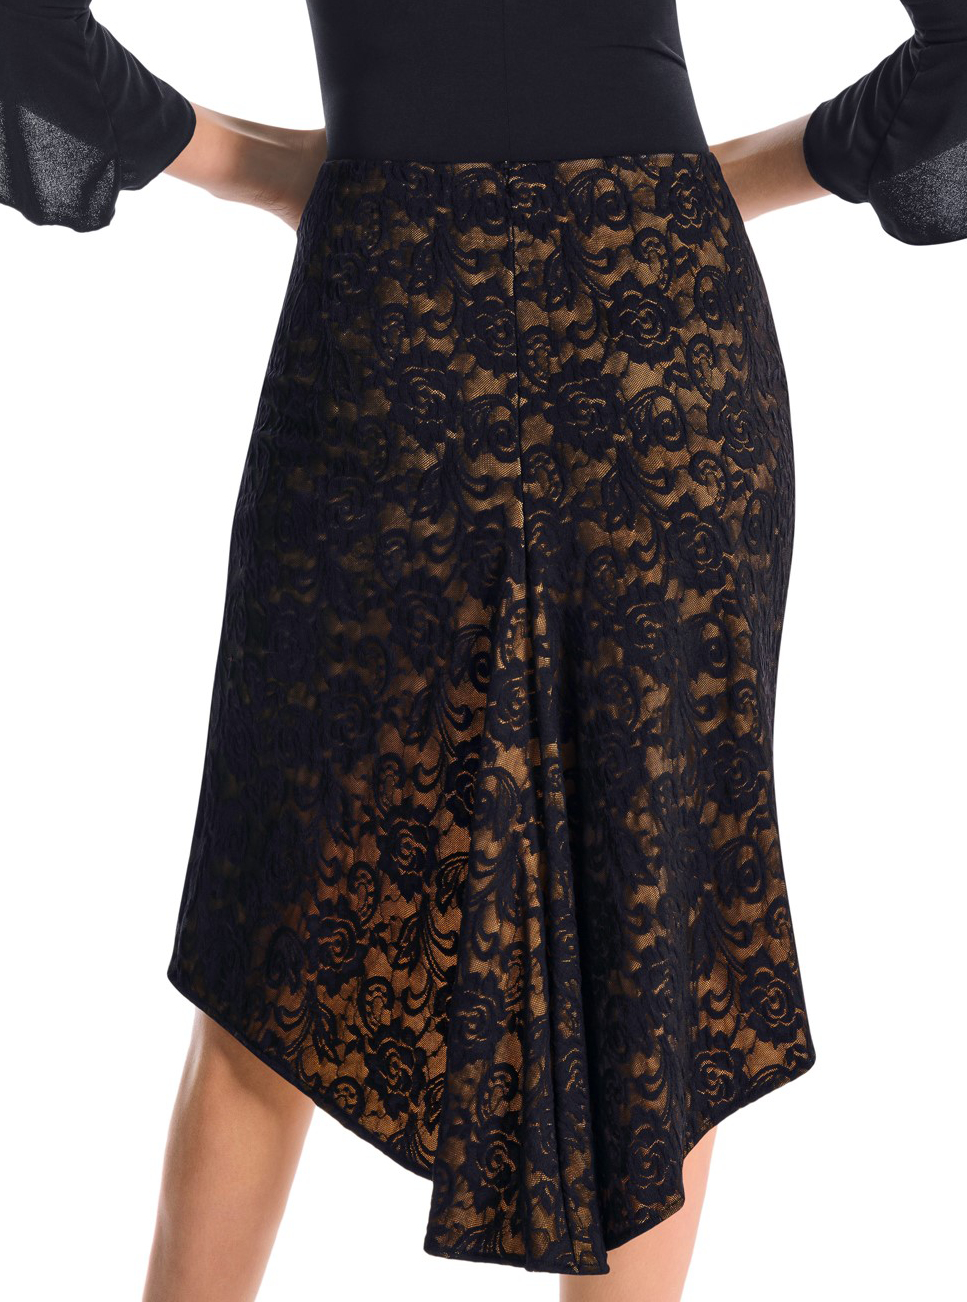 Victoria Blitz CANICATTI Black Latin Practice Skirt with High Front Slit, Asymmetric Cut in Back, and Floral Lace Overlay with Full Nude Lining PRA 719 in Stock